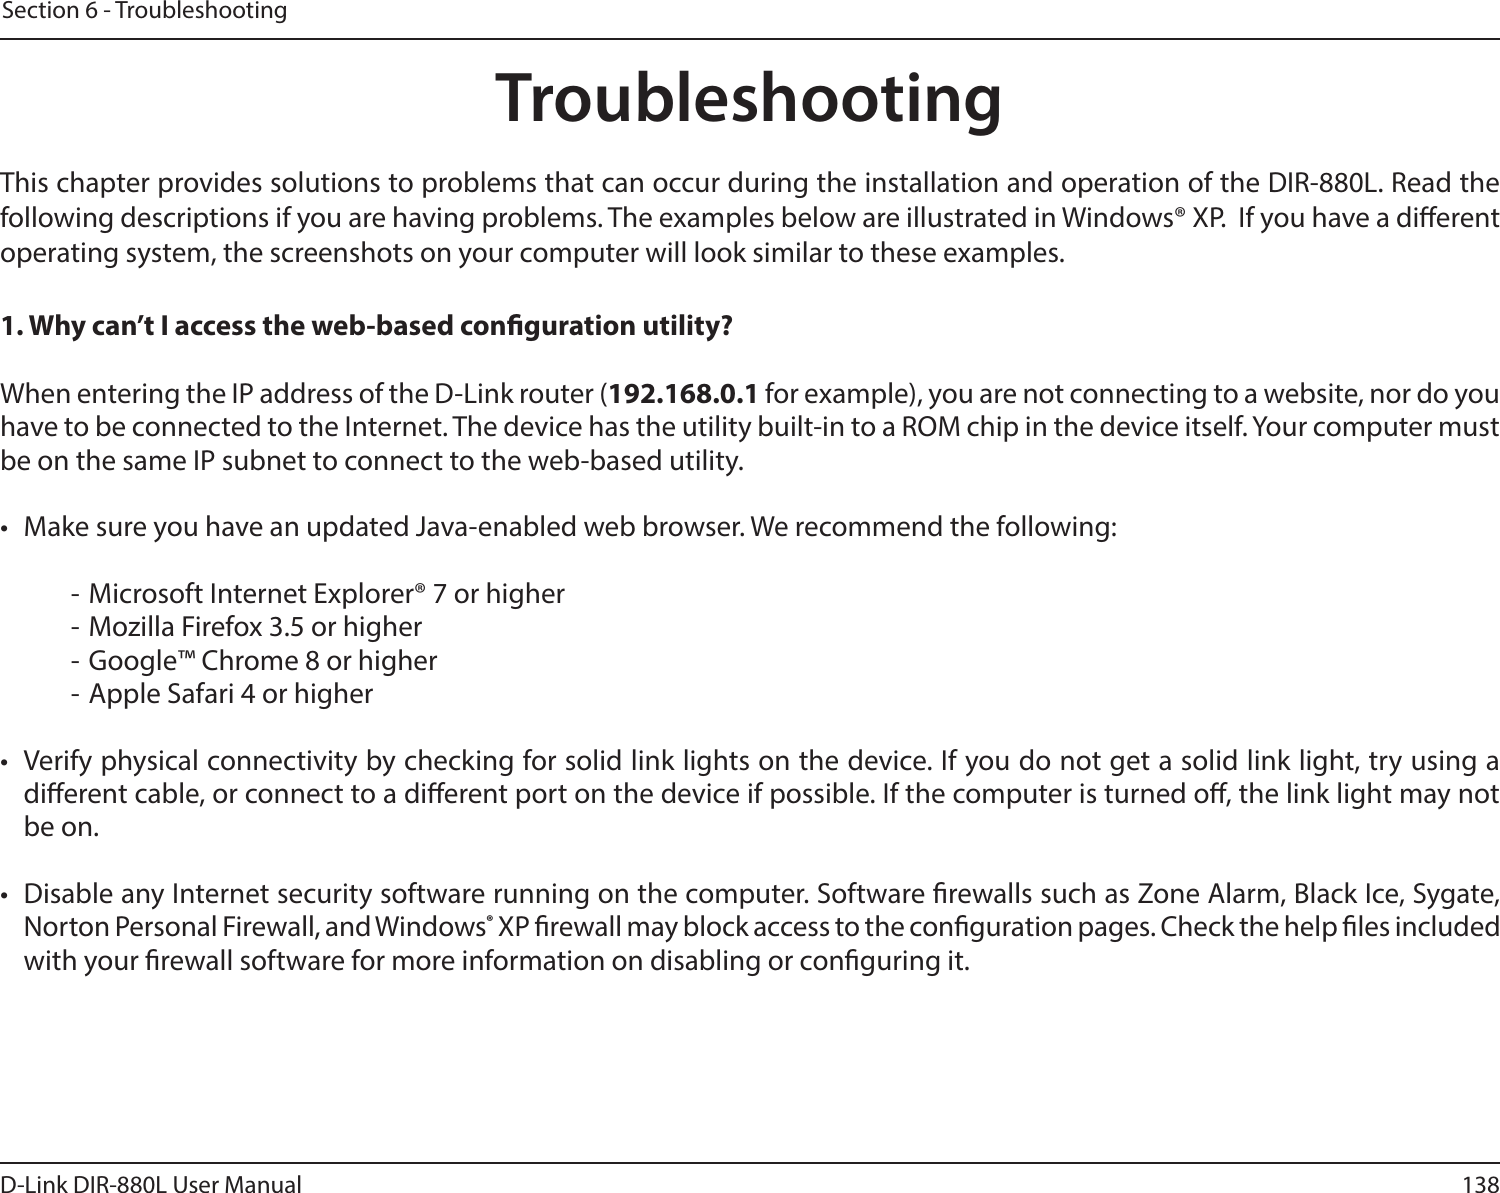 138D-Link DIR-880L User ManualSection 6 - TroubleshootingTroubleshootingThis chapter provides solutions to problems that can occur during the installation and operation of the DIR-880L. Read the following descriptions if you are having problems. The examples below are illustrated in Windows® XP.  If you have a dierent operating system, the screenshots on your computer will look similar to these examples.1. Why can’t I access the web-based conguration utility?When entering the IP address of the D-Link router (192.168.0.1 for example), you are not connecting to a website, nor do you have to be connected to the Internet. The device has the utility built-in to a ROM chip in the device itself. Your computer must be on the same IP subnet to connect to the web-based utility. •  Make sure you have an updated Java-enabled web browser. We recommend the following:  - Microsoft Internet Explorer® 7 or higher- Mozilla Firefox 3.5 or higher- Google™ Chrome 8 or higher- Apple Safari 4 or higher•  Verify physical connectivity by checking for solid link lights on the device. If you do not get a solid link light, try using a dierent cable, or connect to a dierent port on the device if possible. If the computer is turned o, the link light may not be on.•  Disable any Internet security software running on the computer. Software rewalls such as Zone Alarm, Black Ice, Sygate, Norton Personal Firewall, and Windows® XP rewall may block access to the conguration pages. Check the help les included with your rewall software for more information on disabling or conguring it.